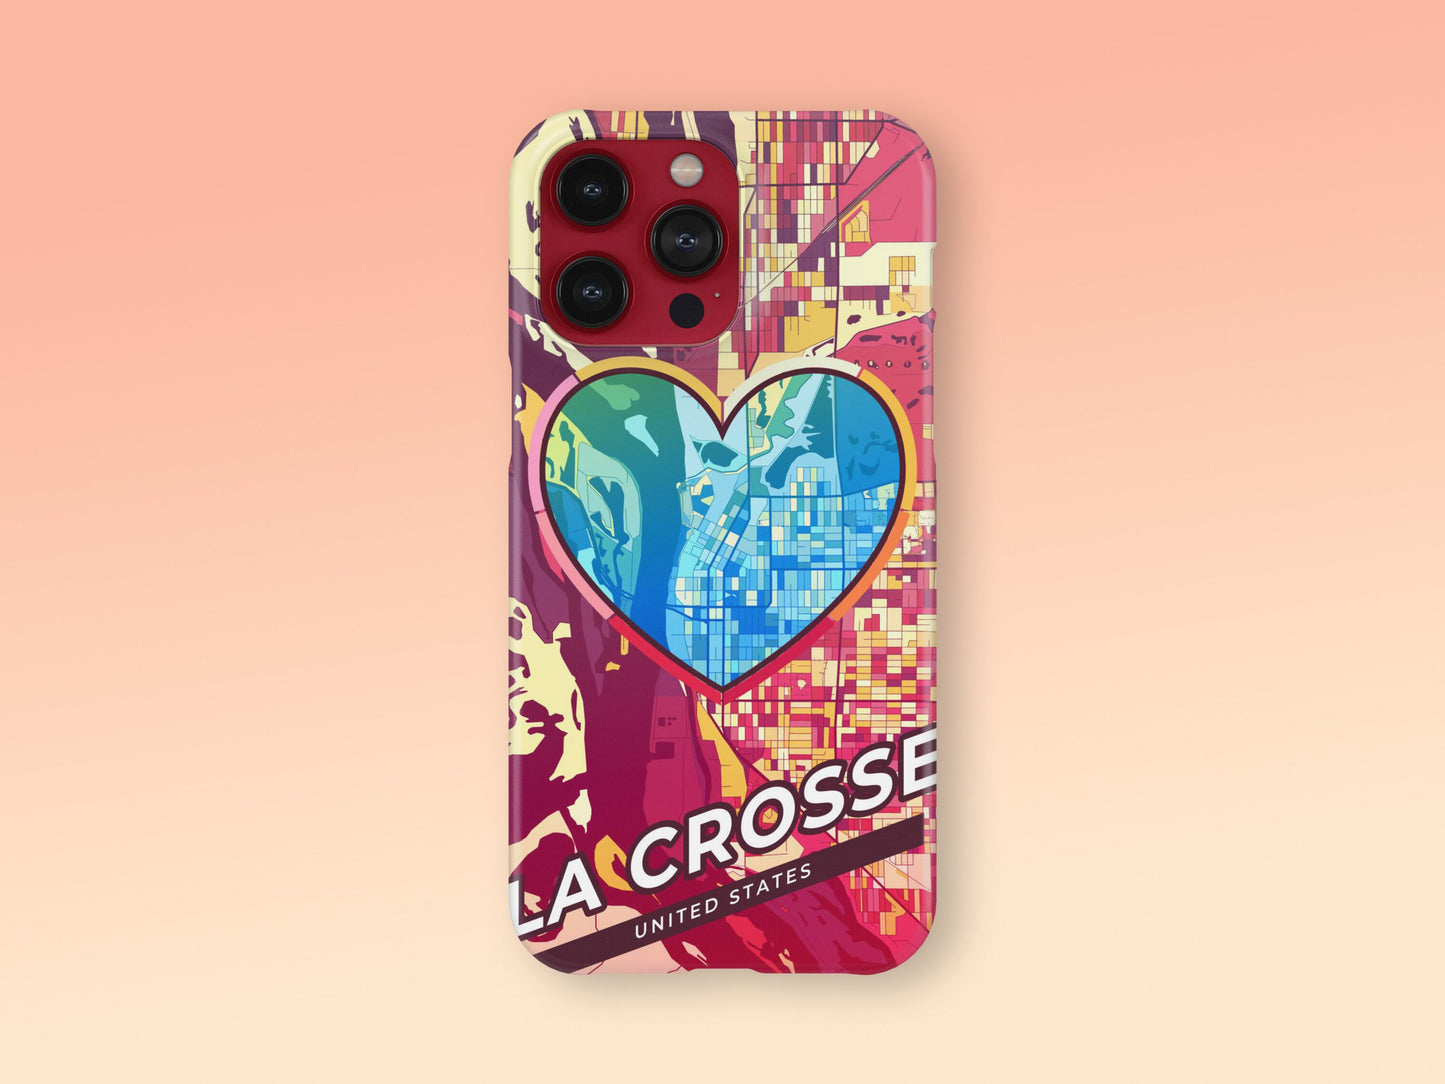 La Crosse Wisconsin slim phone case with colorful icon. Birthday, wedding or housewarming gift. Couple match cases. 2